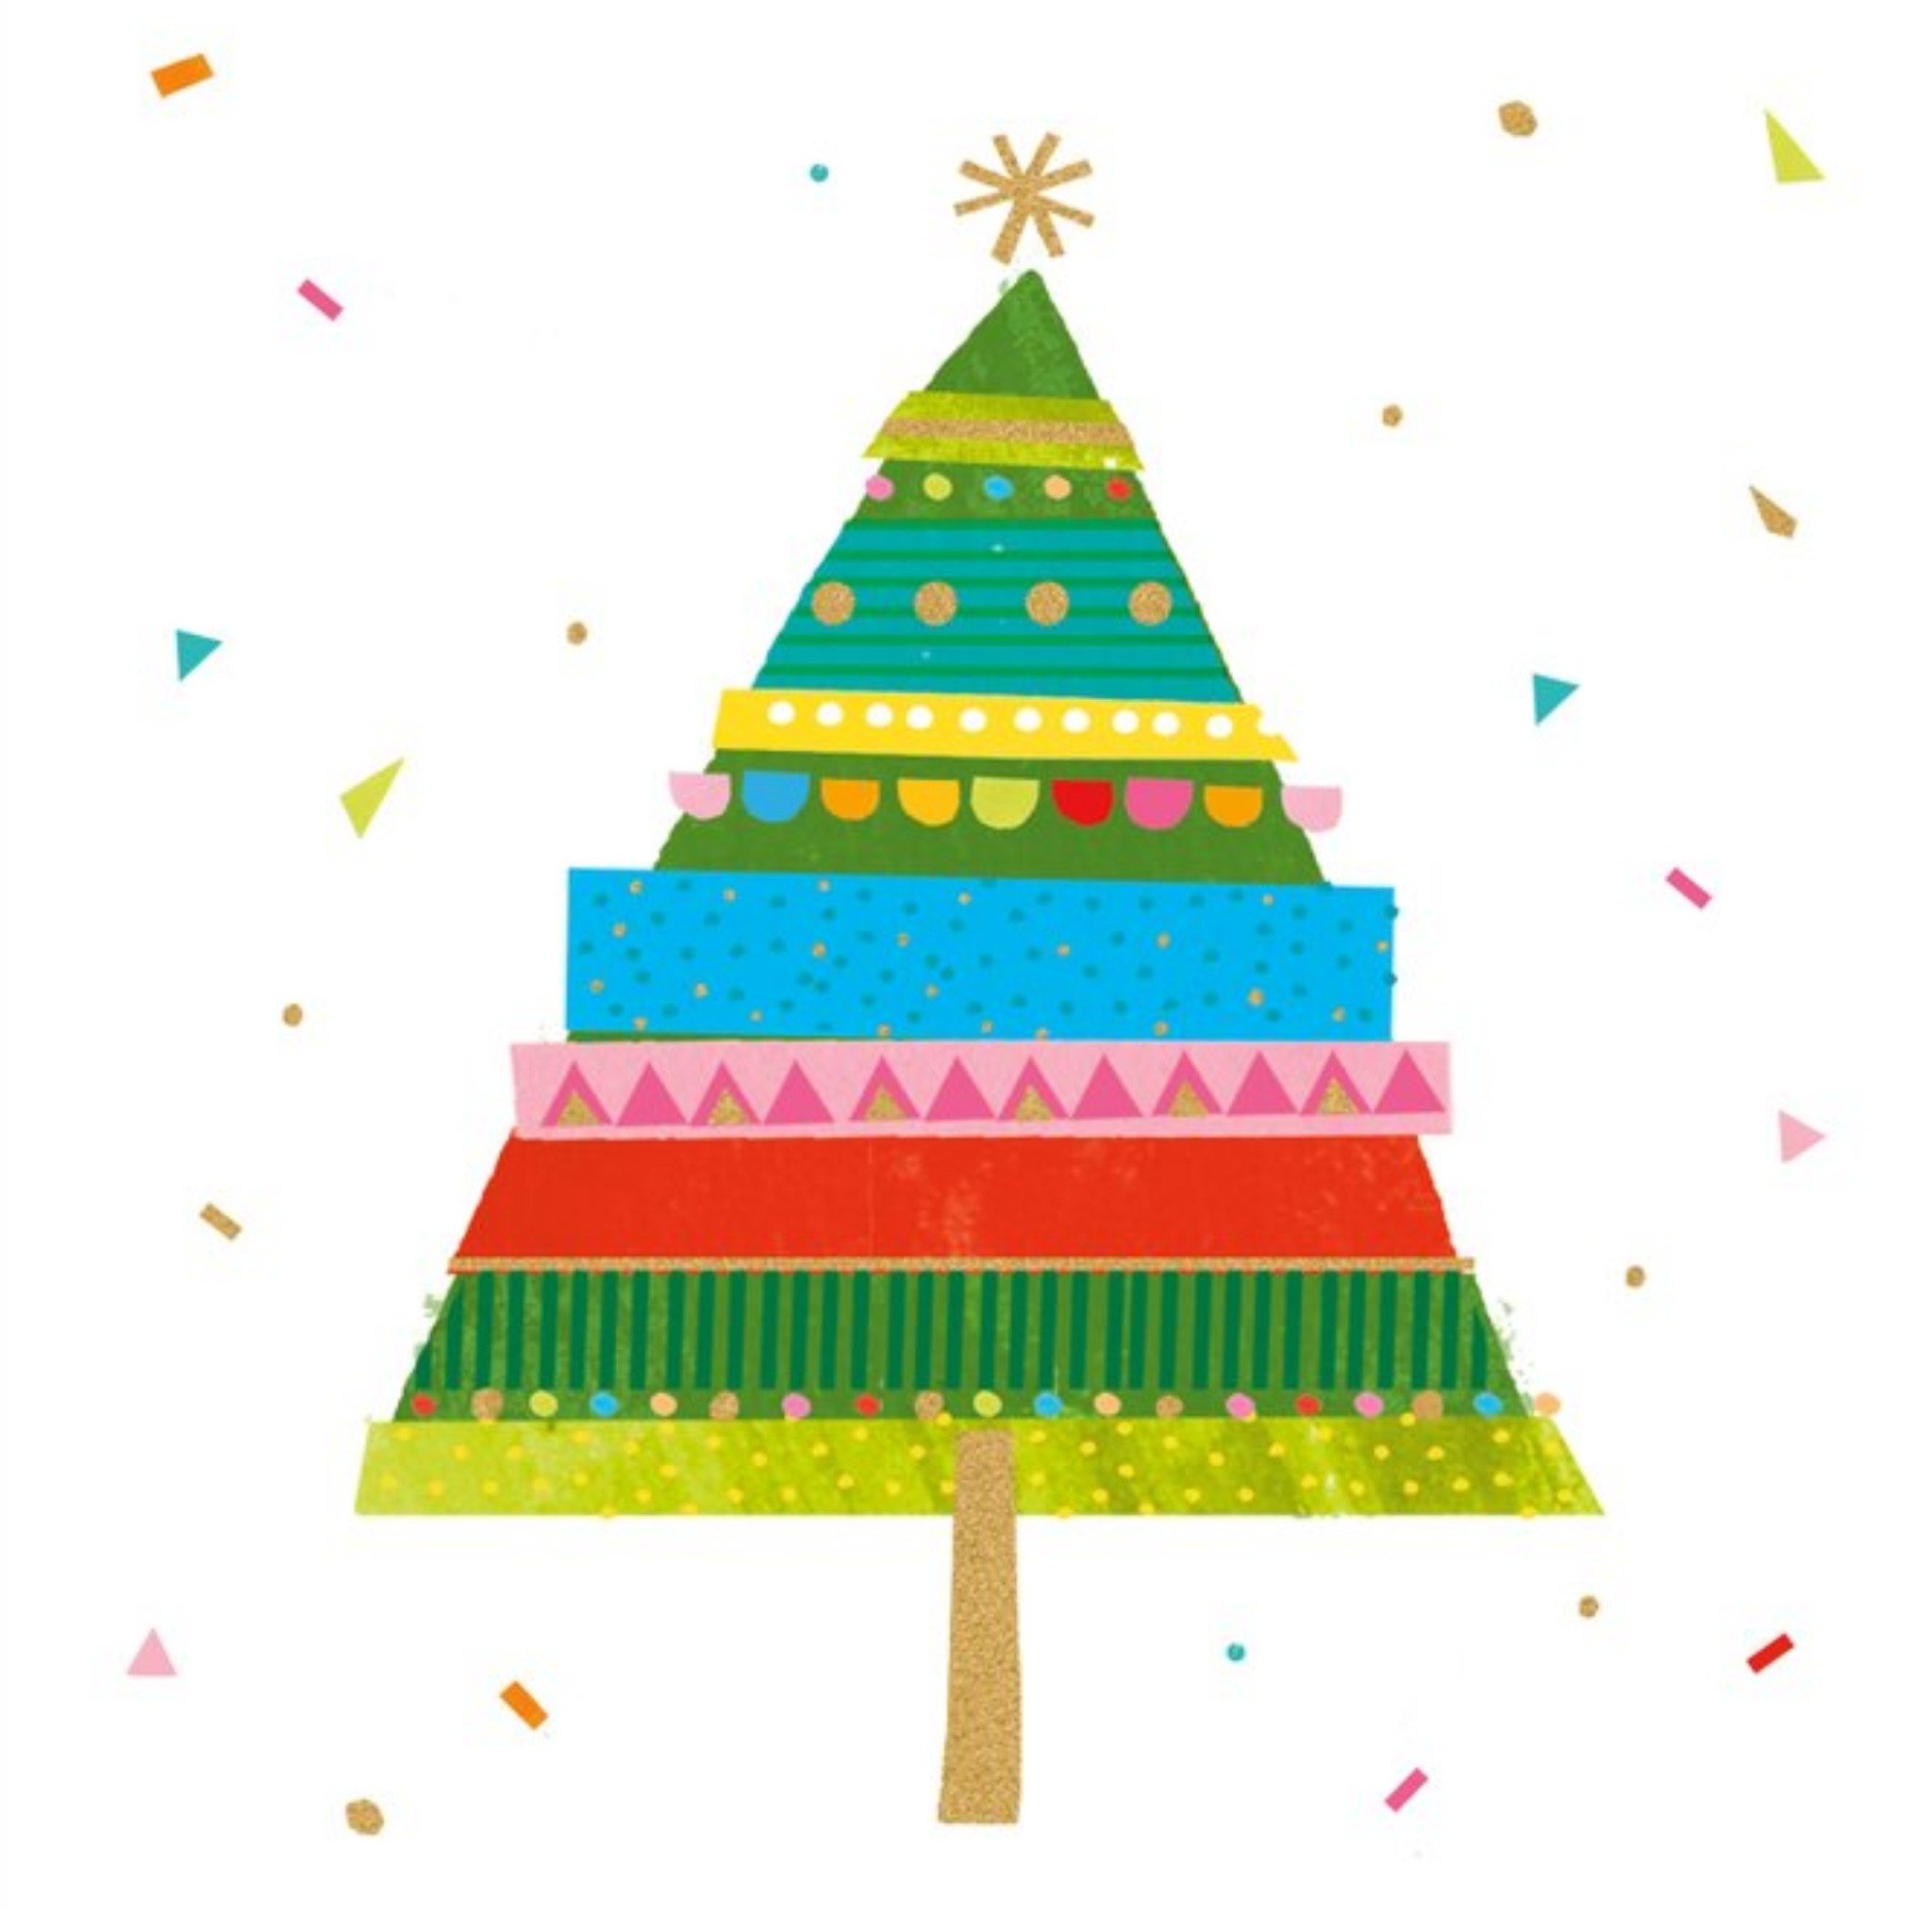 Moonpig Illustration Of A Colourful Christmas Tree Christmas Card, Square